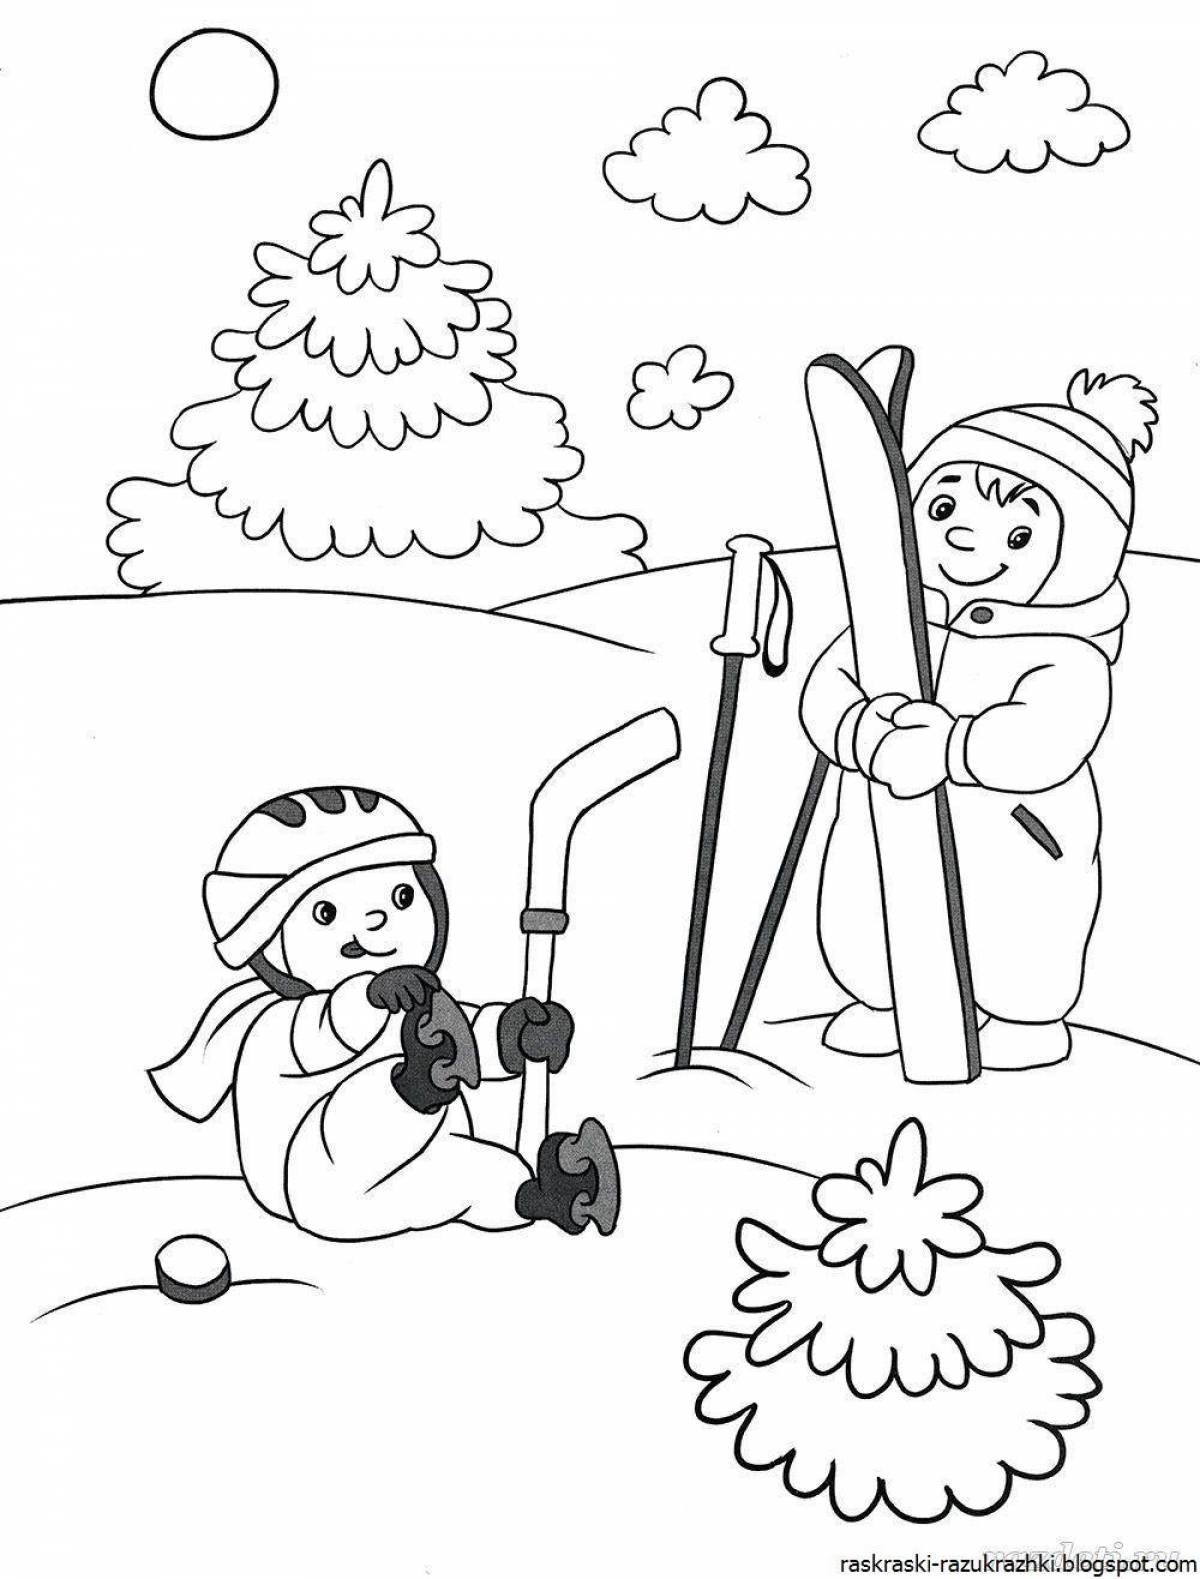 Adorable coloring book for kids winter fun 5-6 years old